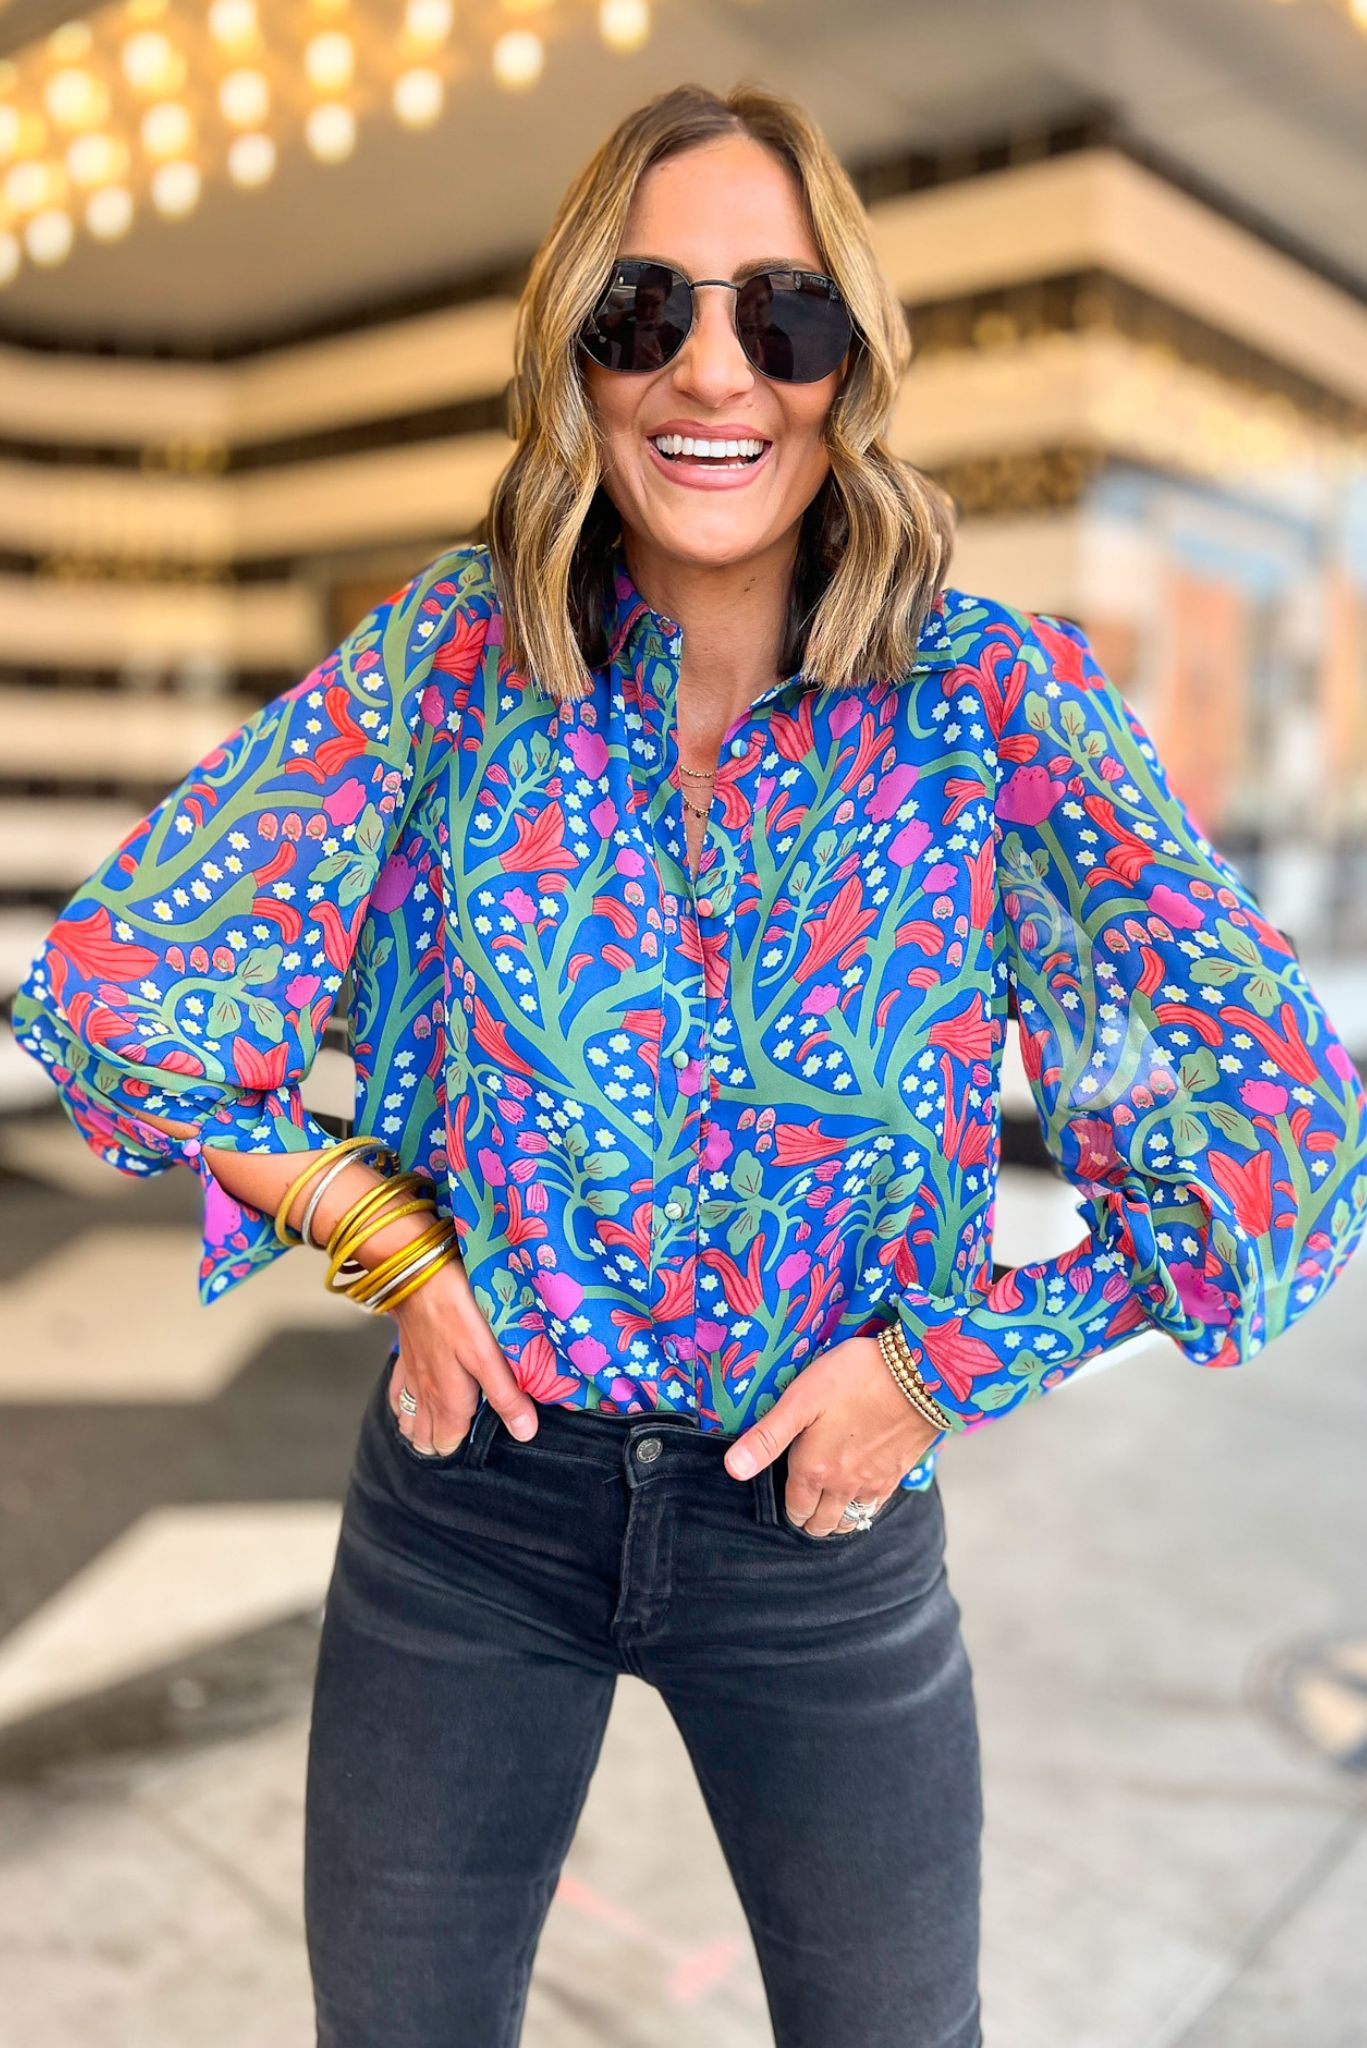 Blue Floral Bubble Long Sleeve Button Down Top, floral print, bright fall top, light weight, work wear, mom style, shop style your senses by mallory fitzsimmons